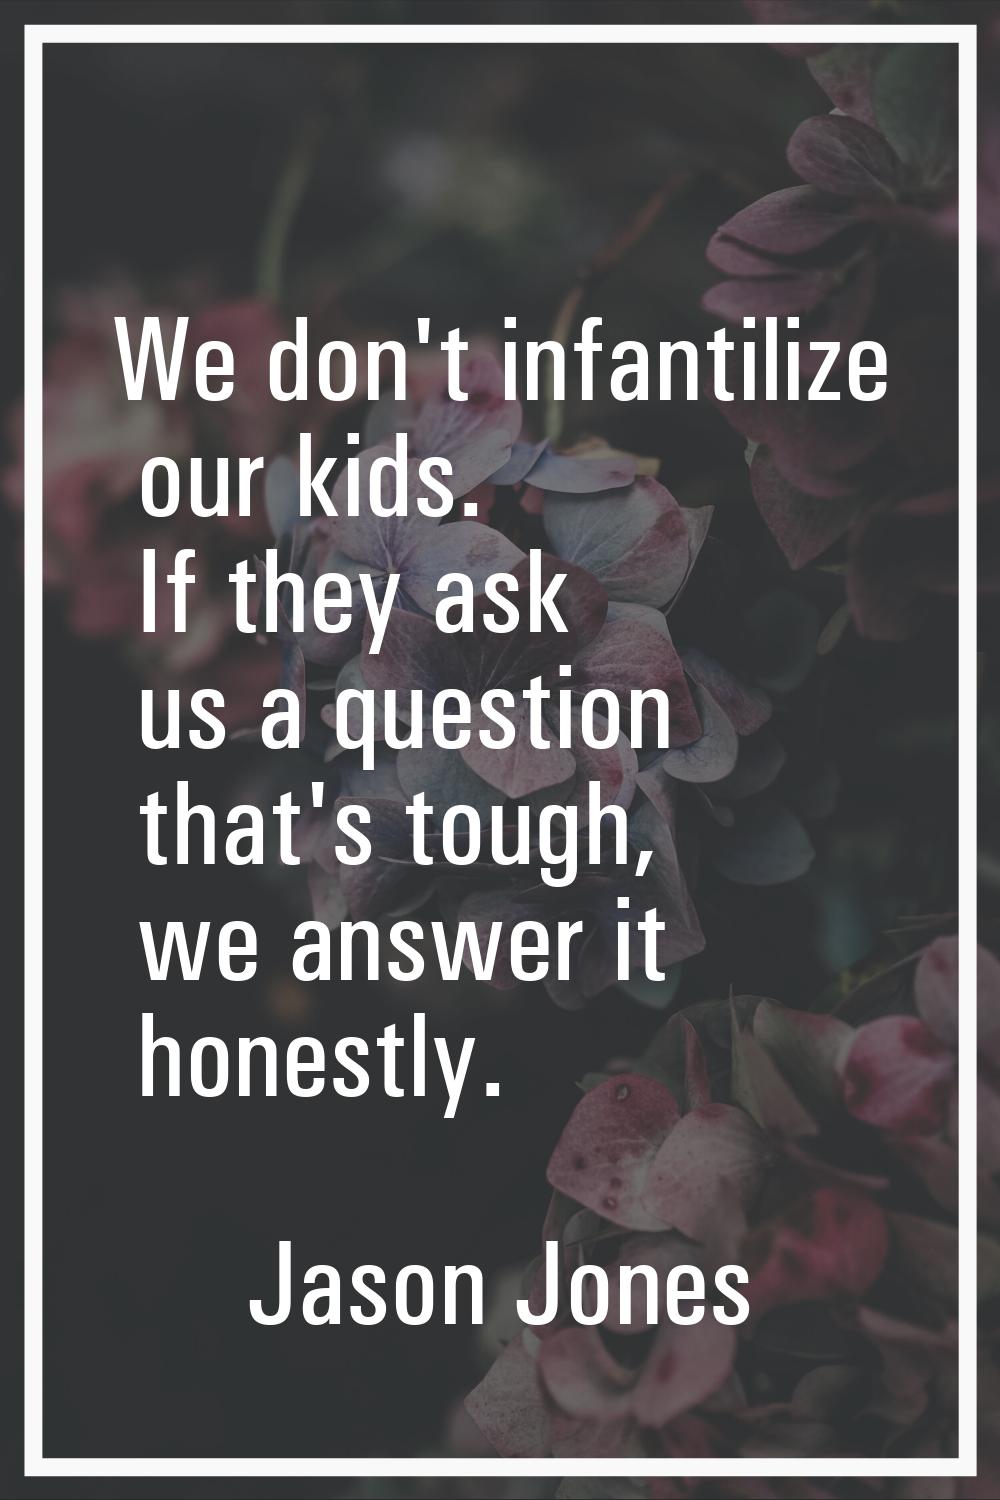 We don't infantilize our kids. If they ask us a question that's tough, we answer it honestly.